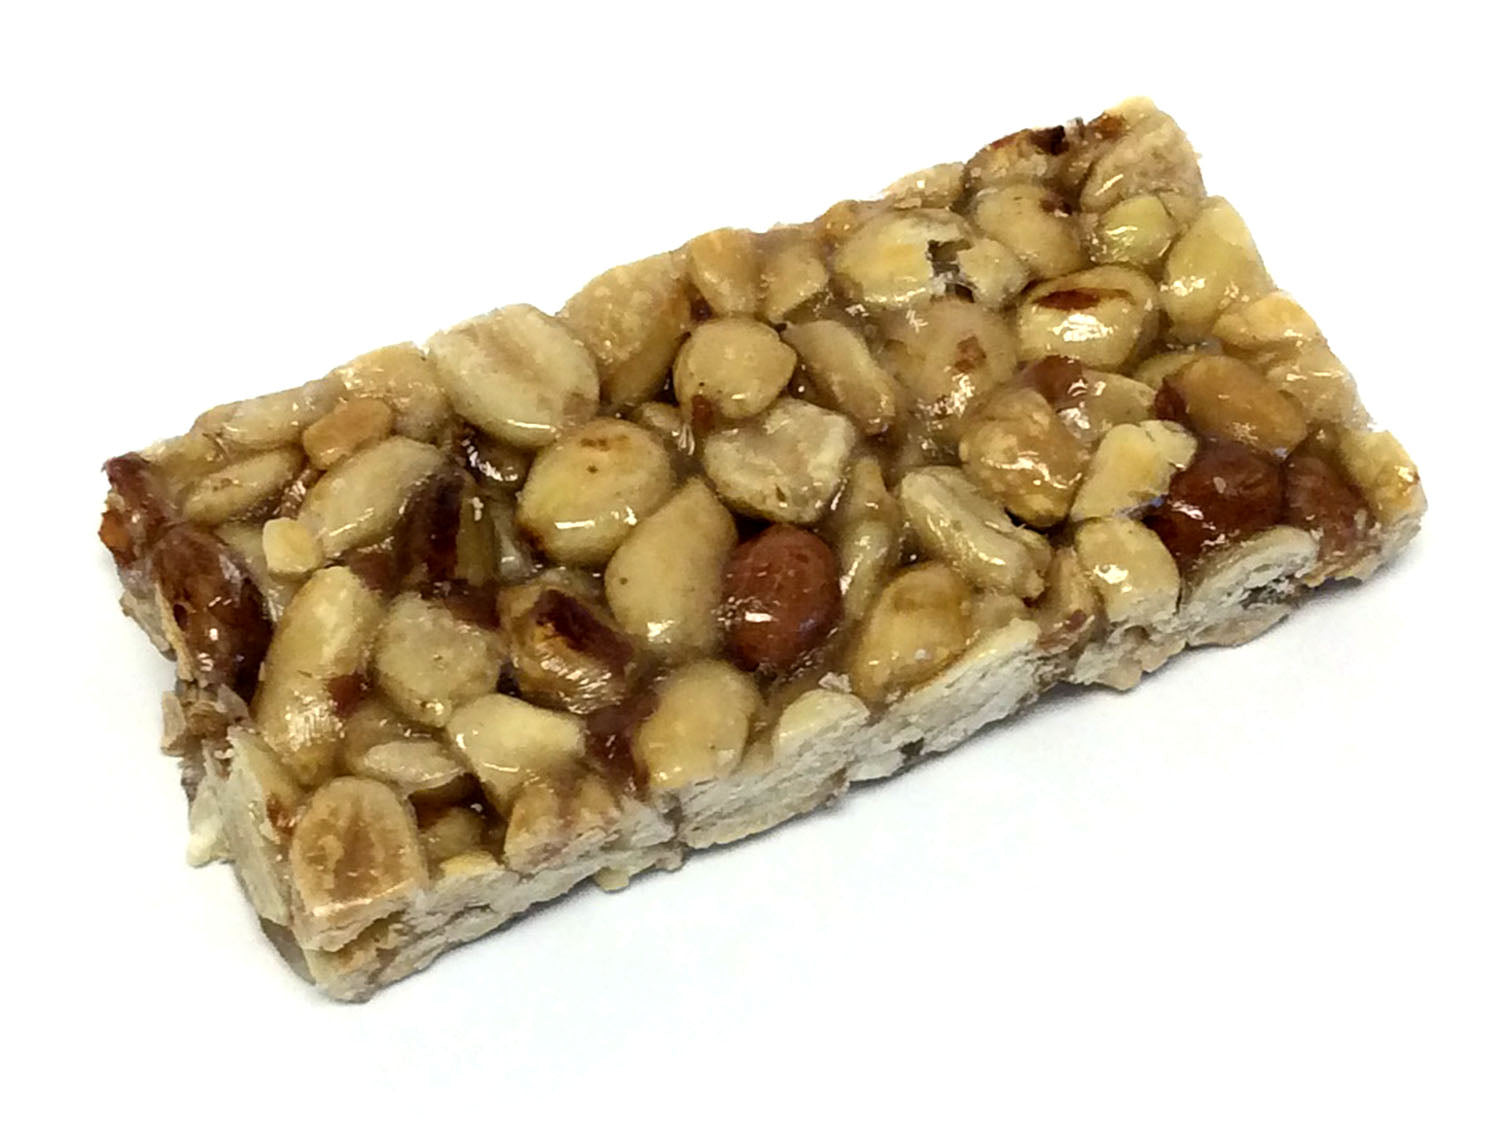 Peanut Bars by Old Dominion - 1.65 oz bar  unwrapped